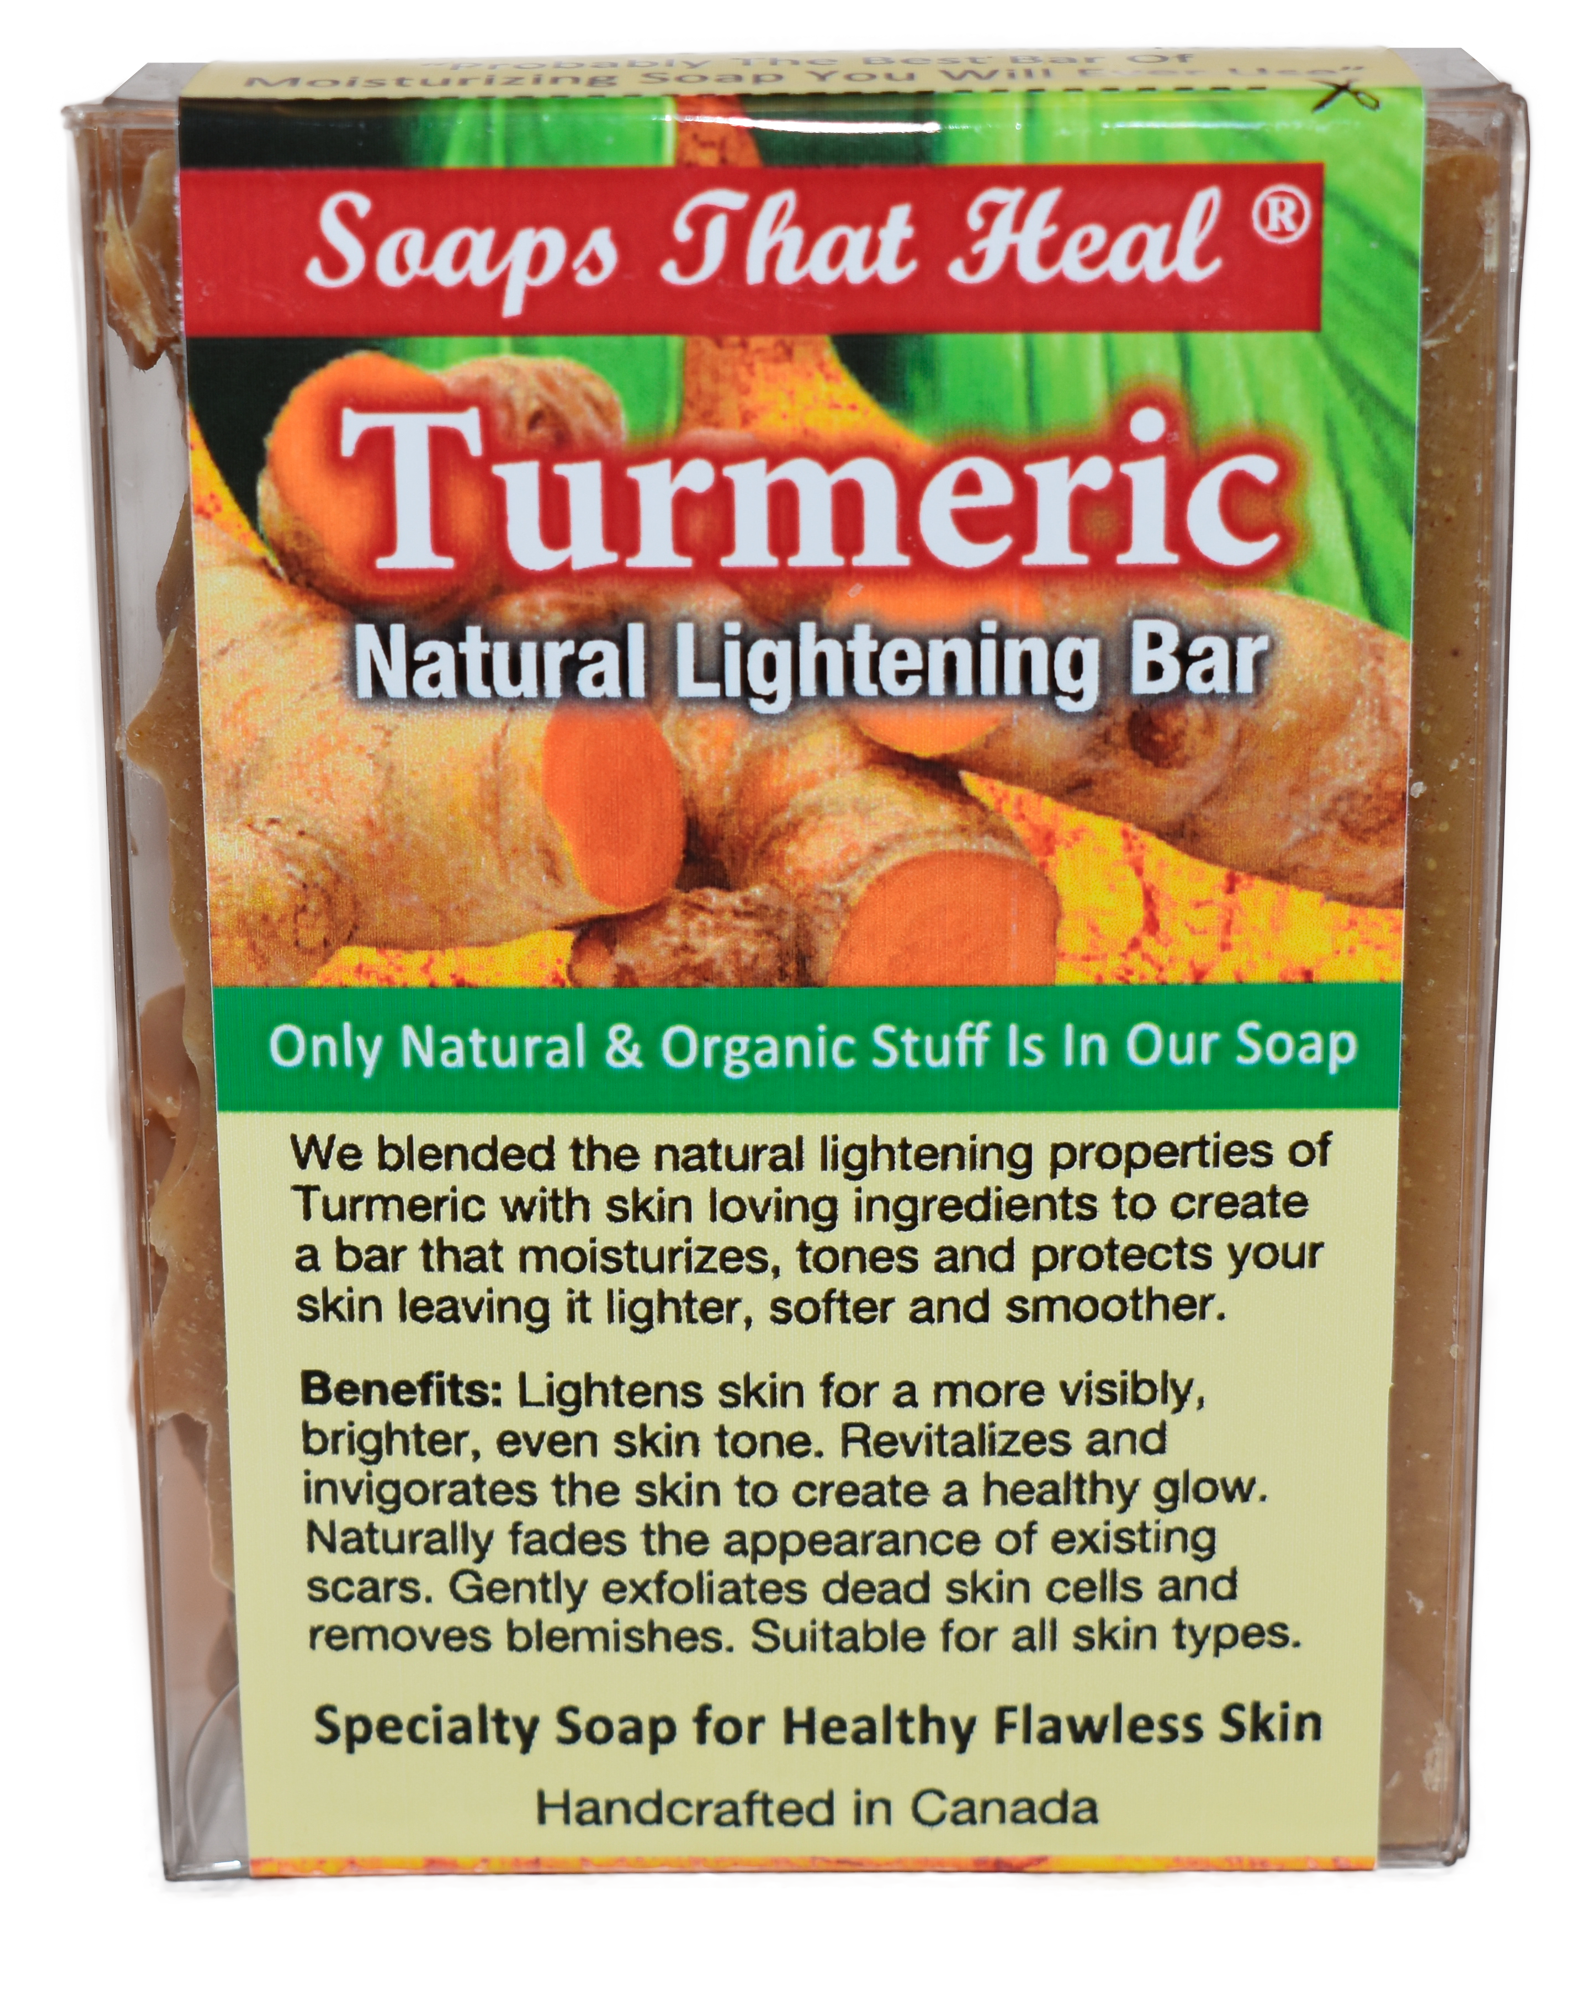 soaps that heal turmeric soap, natural lightening, natural alternatives to whitening creams,fade creams,bleaching creams,Remove Dark Spots and Acne,aspen kay,Healthy Skin, Natural Products Skin Care, problem skin,Turmeric Soap,the best body soap,saje,soaps that heal,healing soap, how to get rid of dark marks,dark spots,whitening soaps,lightening soaps,hyperpigmentation, best turmeric soap,oilblends,uncle benney's,soaps that heal,handcrafted,cold press,soaps